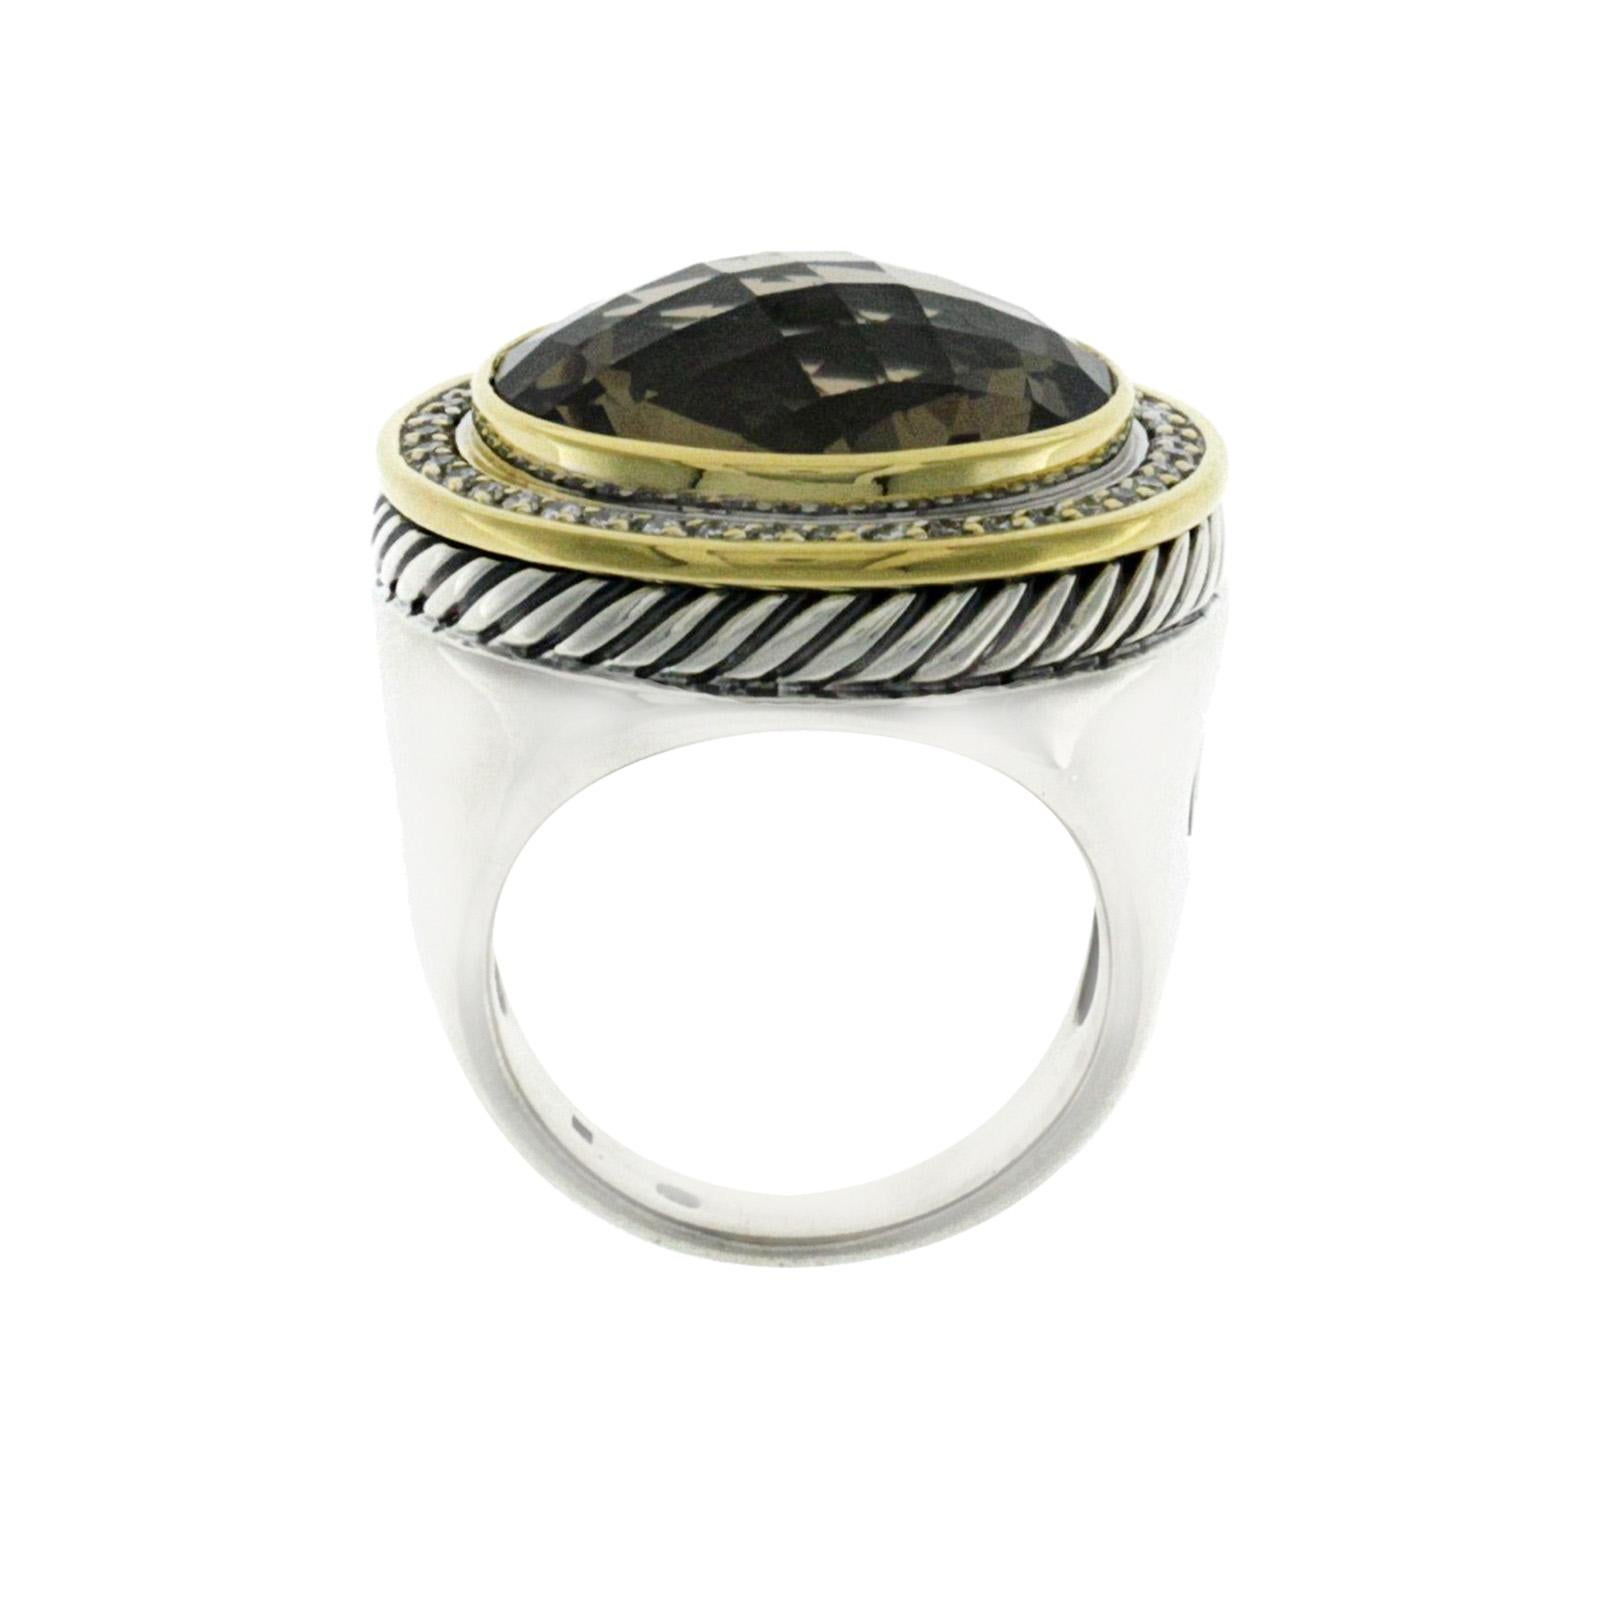 100% Authentic, 100% Customer Satisfaction

Top: 25 mm

Band Width: 5.5 mm

Metal: 925 Sterling Silver & 18K Gold

Size: 7

Hallmarks: DY 925 750

Total Weight: 23.6 Grams

Stone Type: Diamonds & Smoky Topaz

Condition: Pre Owned in Great